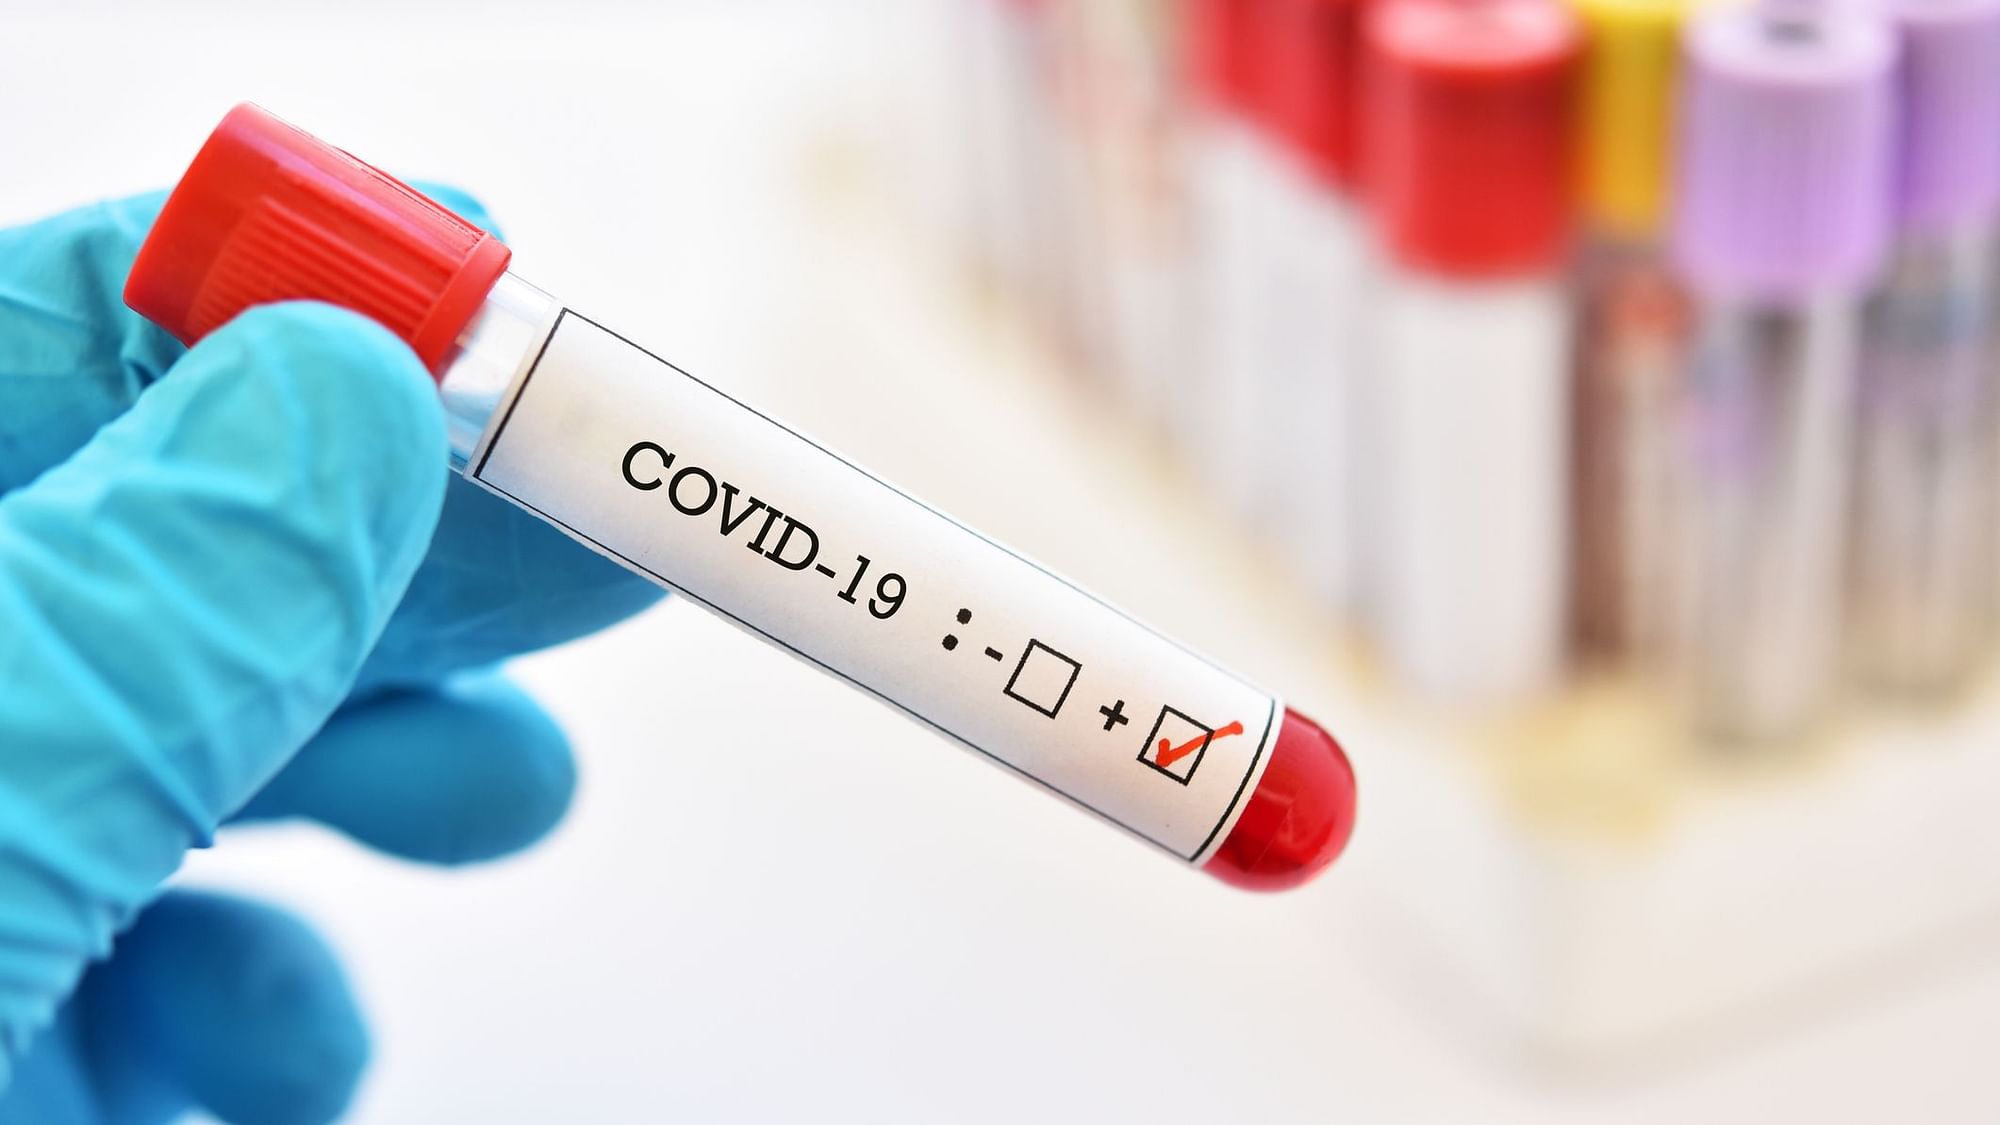 A guide on all that we know about antibody testing for COVID-19 in India.